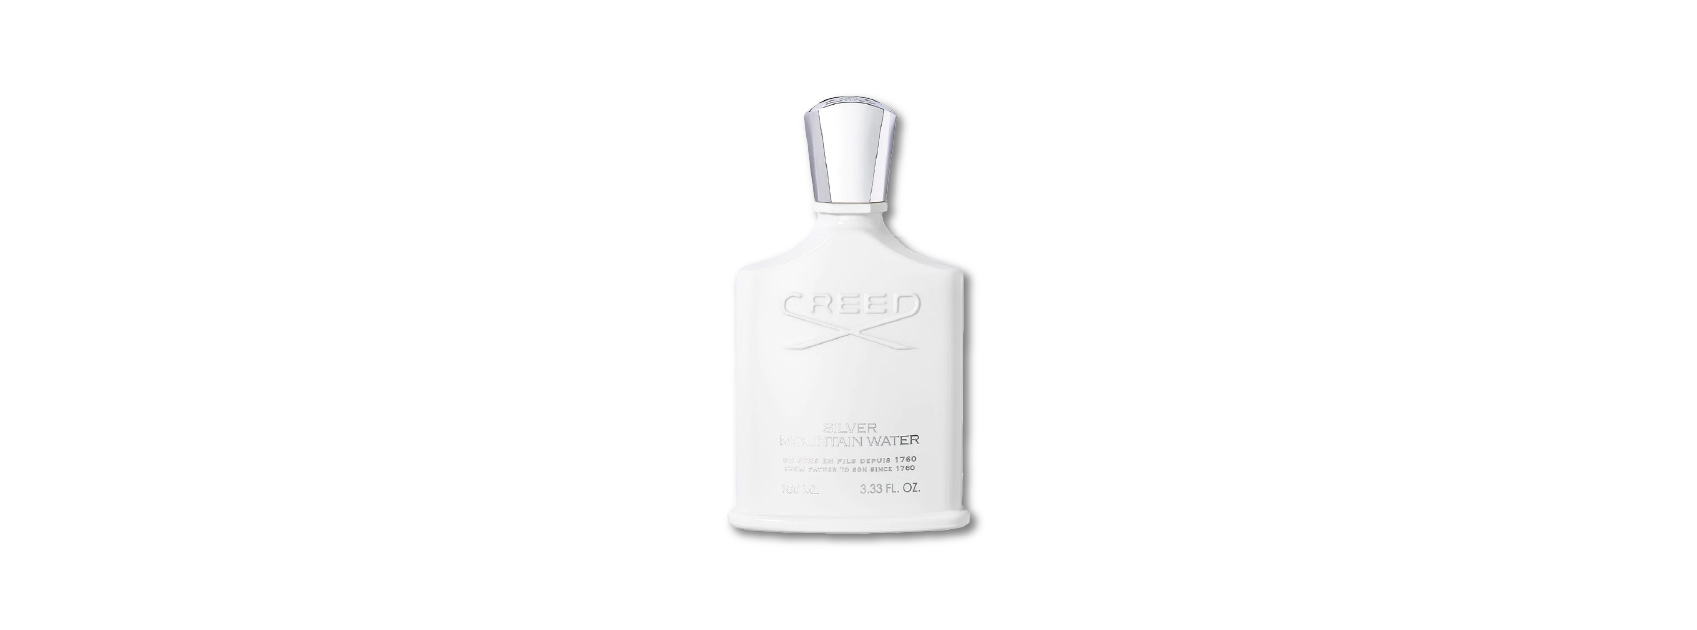 bottle of silver mountain water fragrance by creed